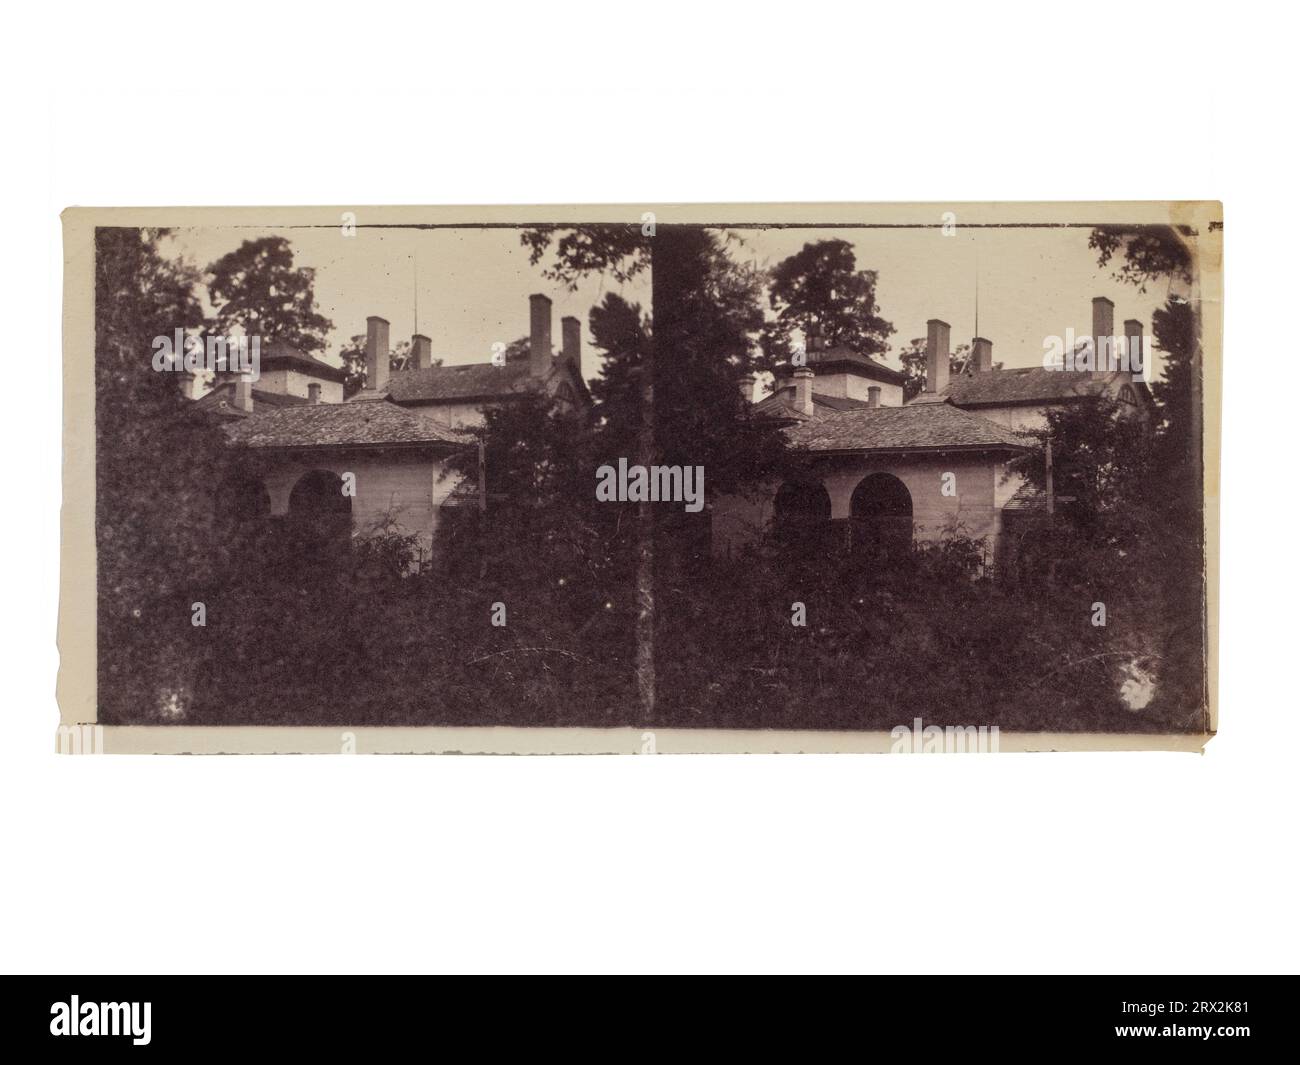 Stereograph by Titian Ramsay Peale, House with double arches among trees. PG.66.25A.93. Stock Photo